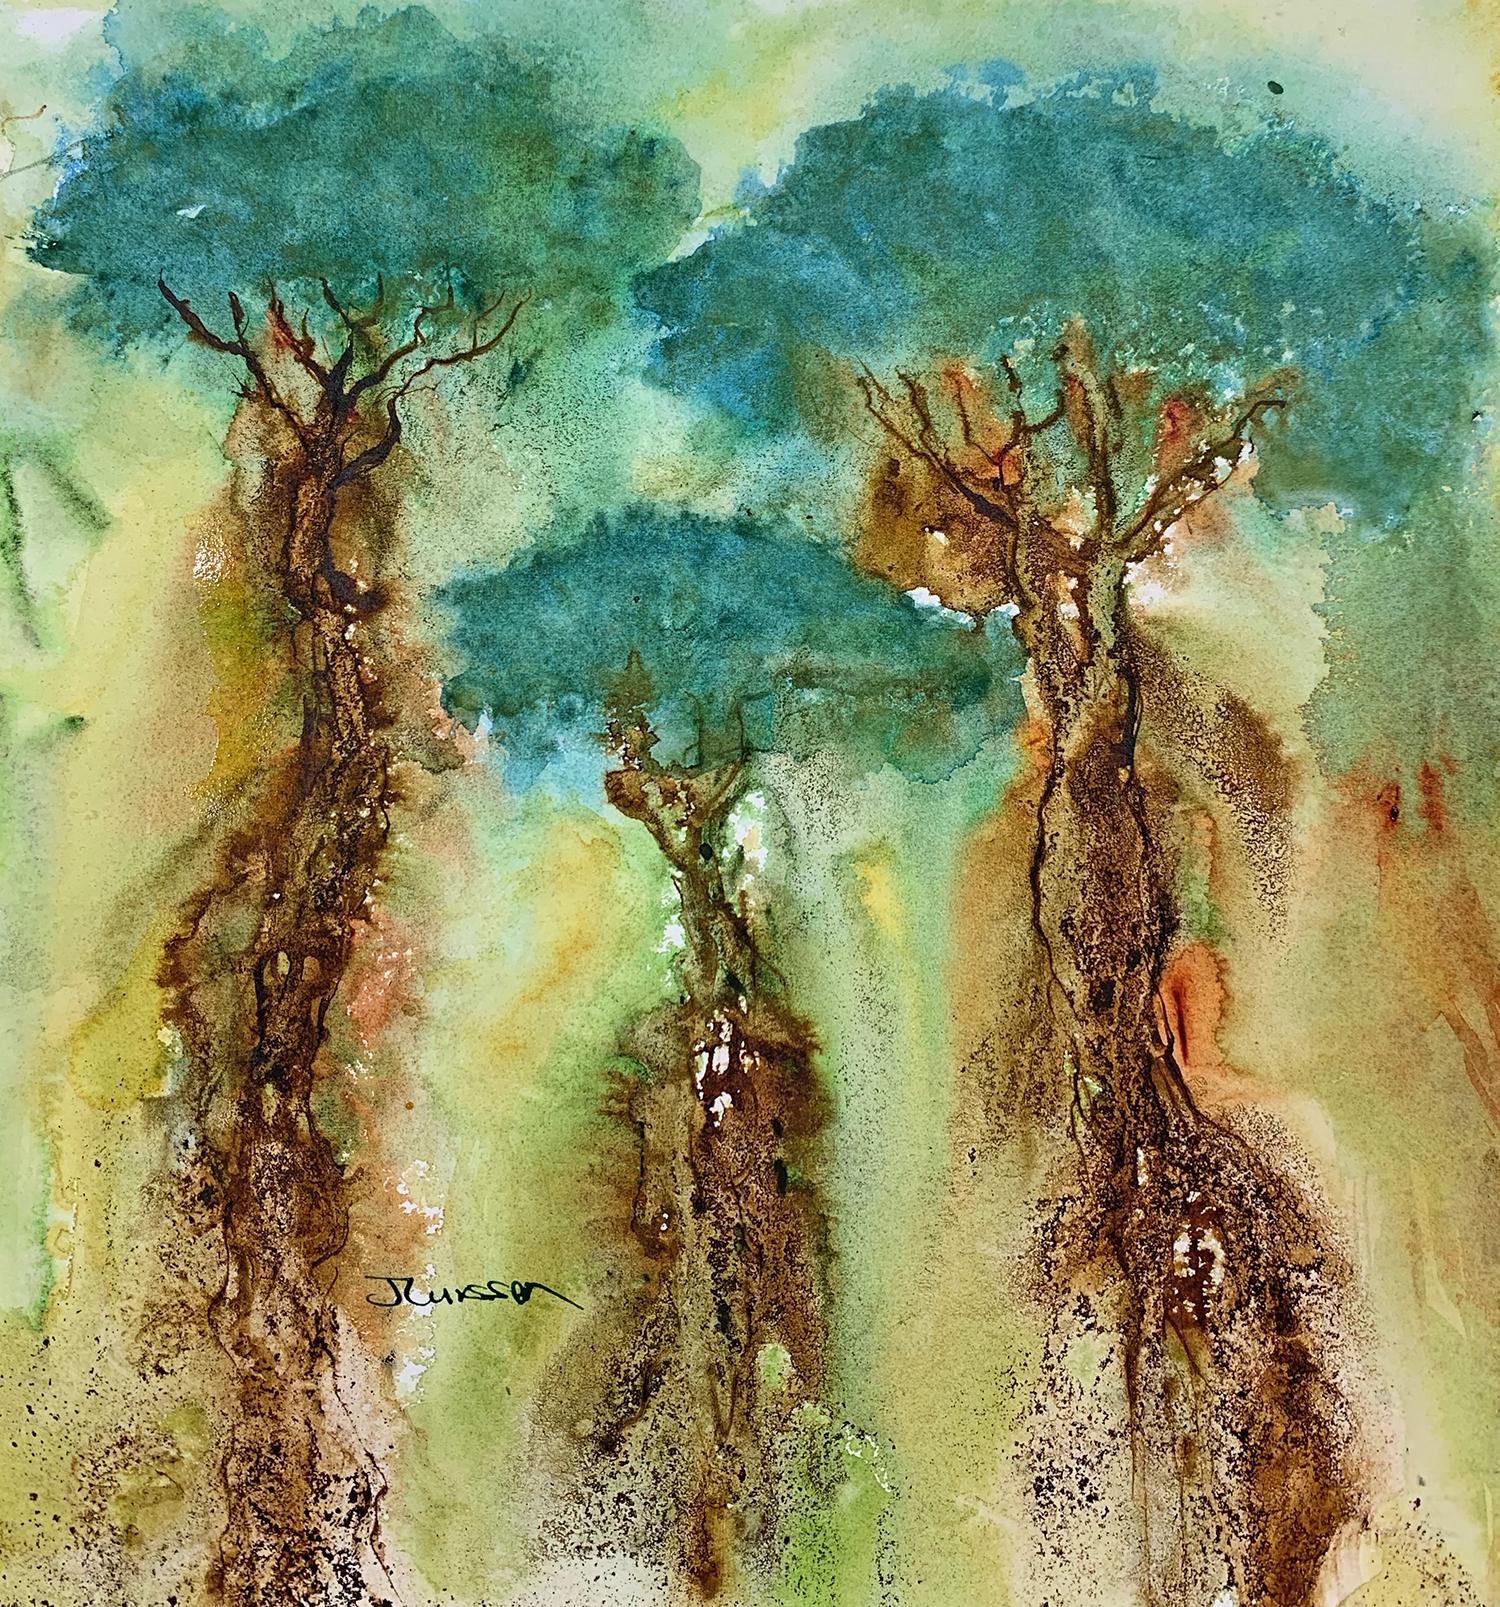 Abstract Trees, Mixed Media on Watercolor Paper - Mixed Media Art by Jean Lurssen